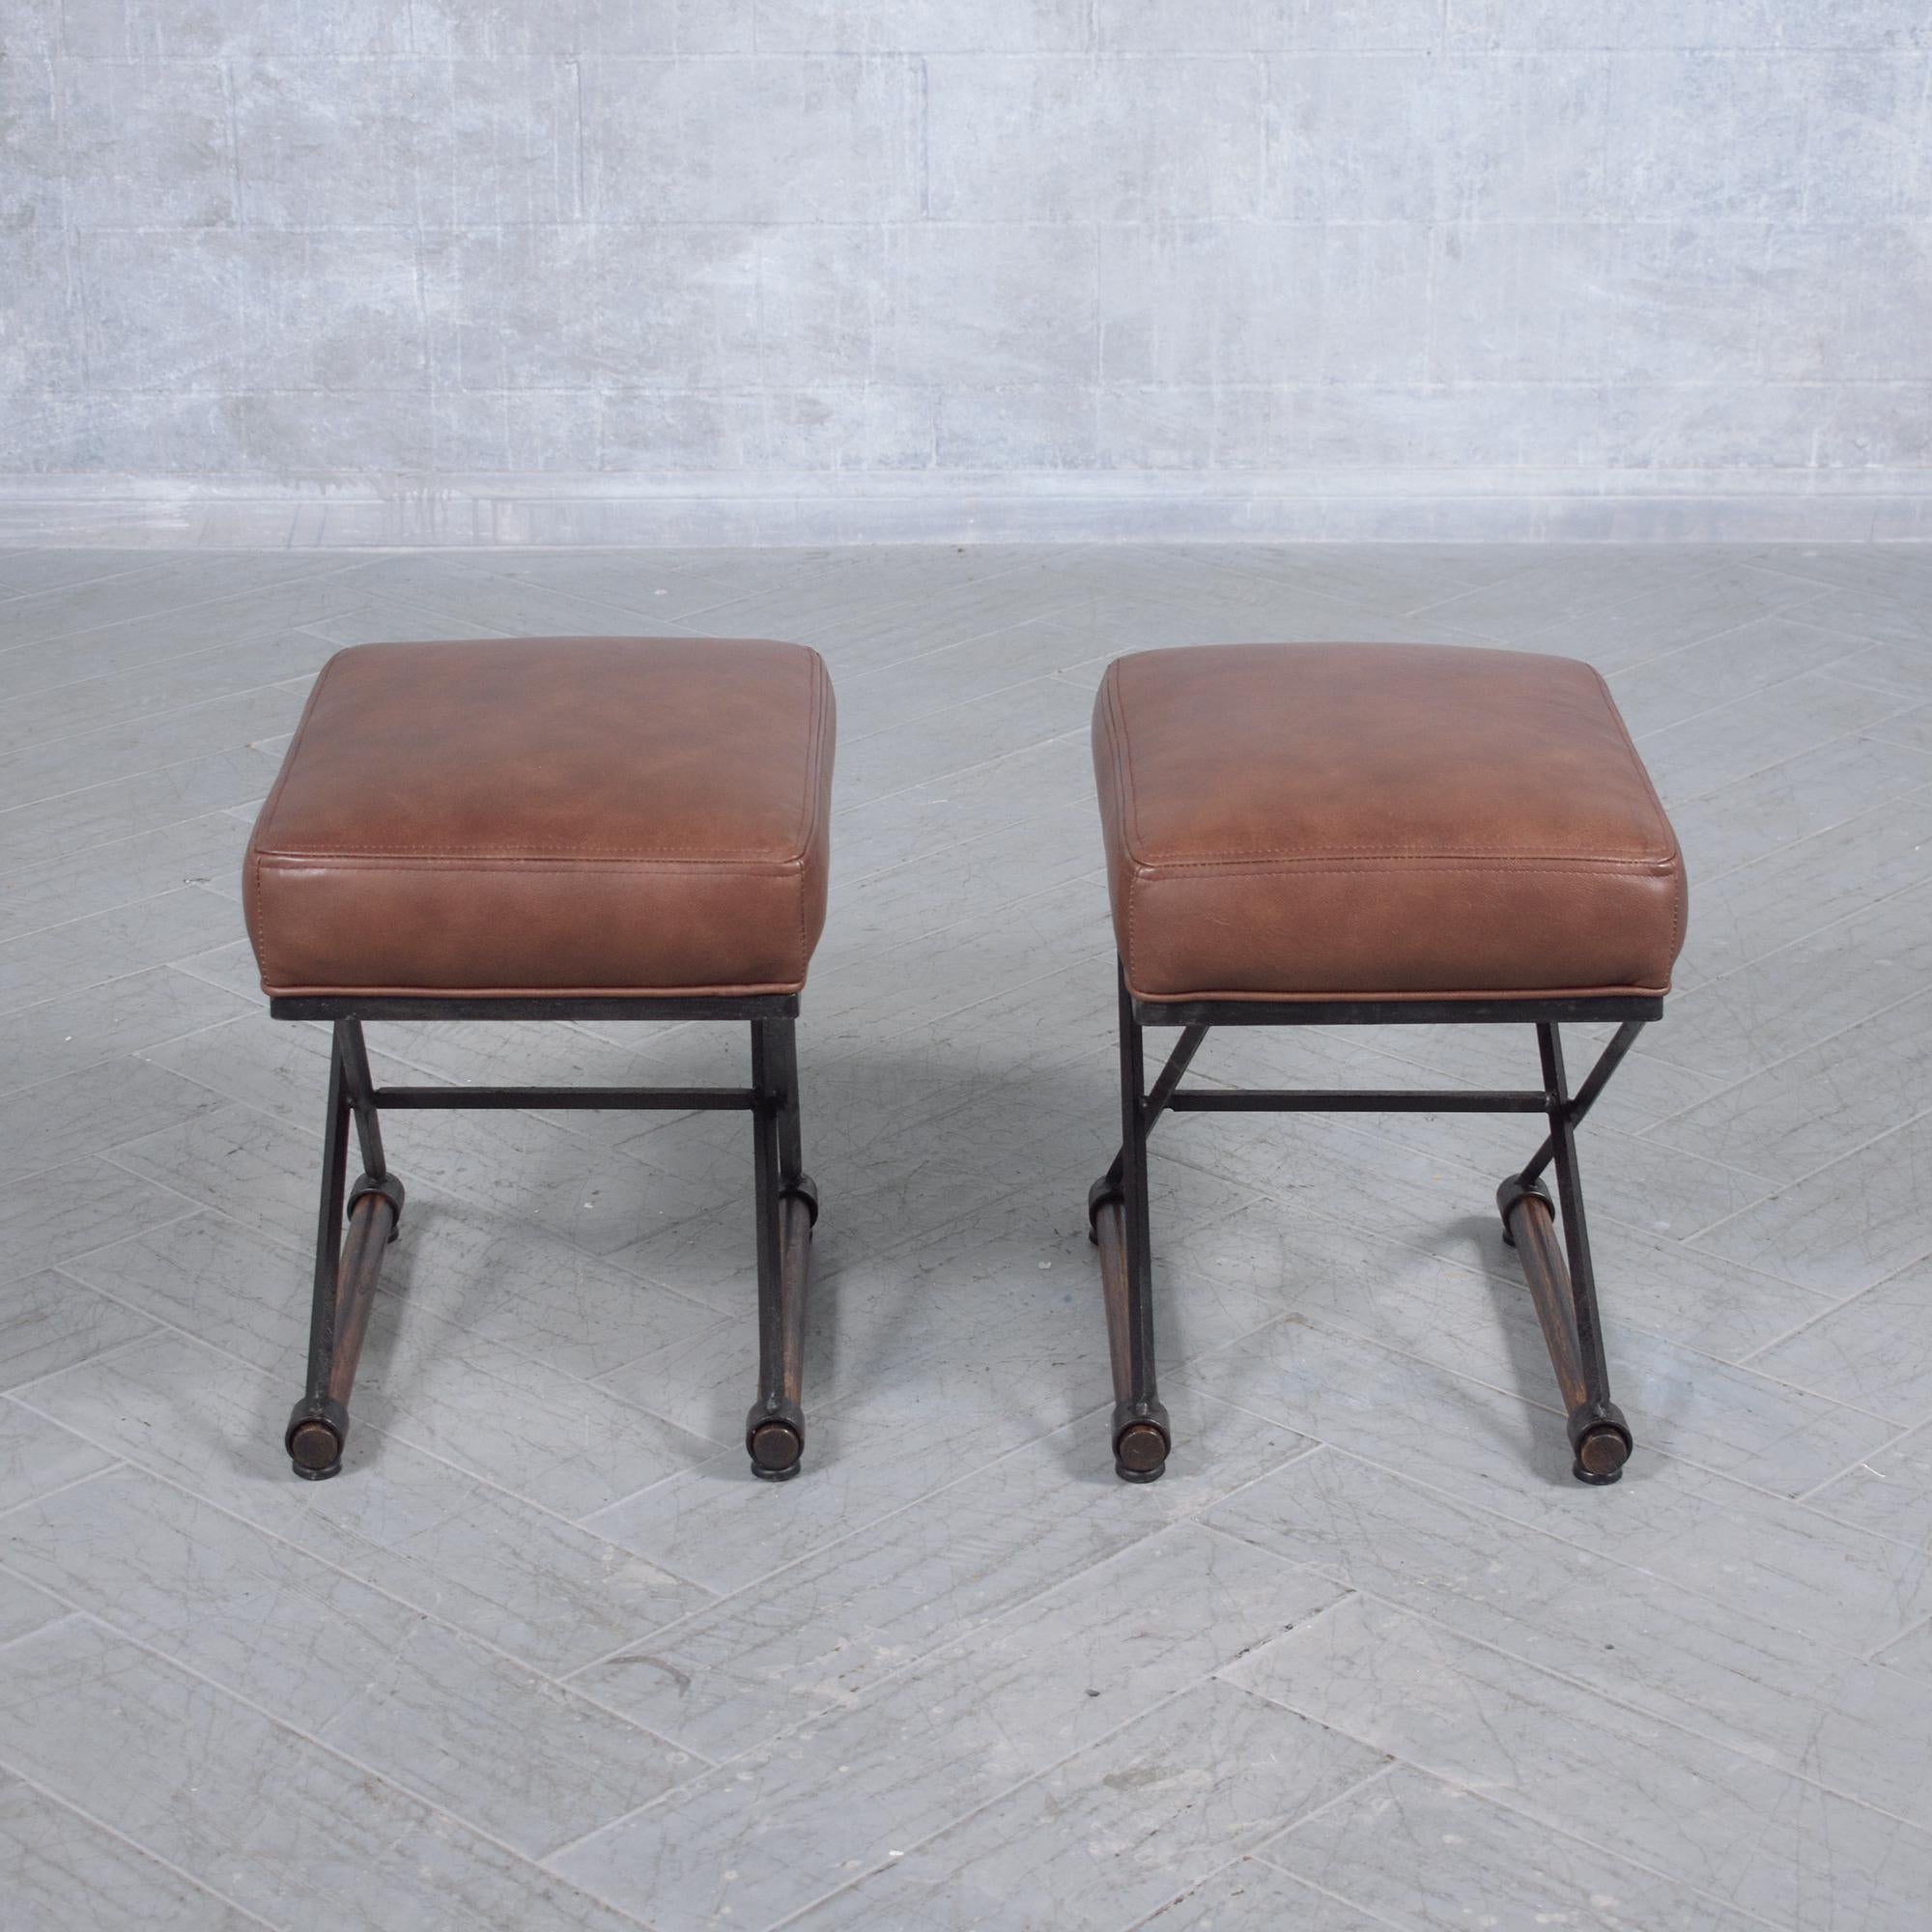 Restored 1970s Campaign Benches: Iron & Oak with Dark Brown Leather Upholstery 4